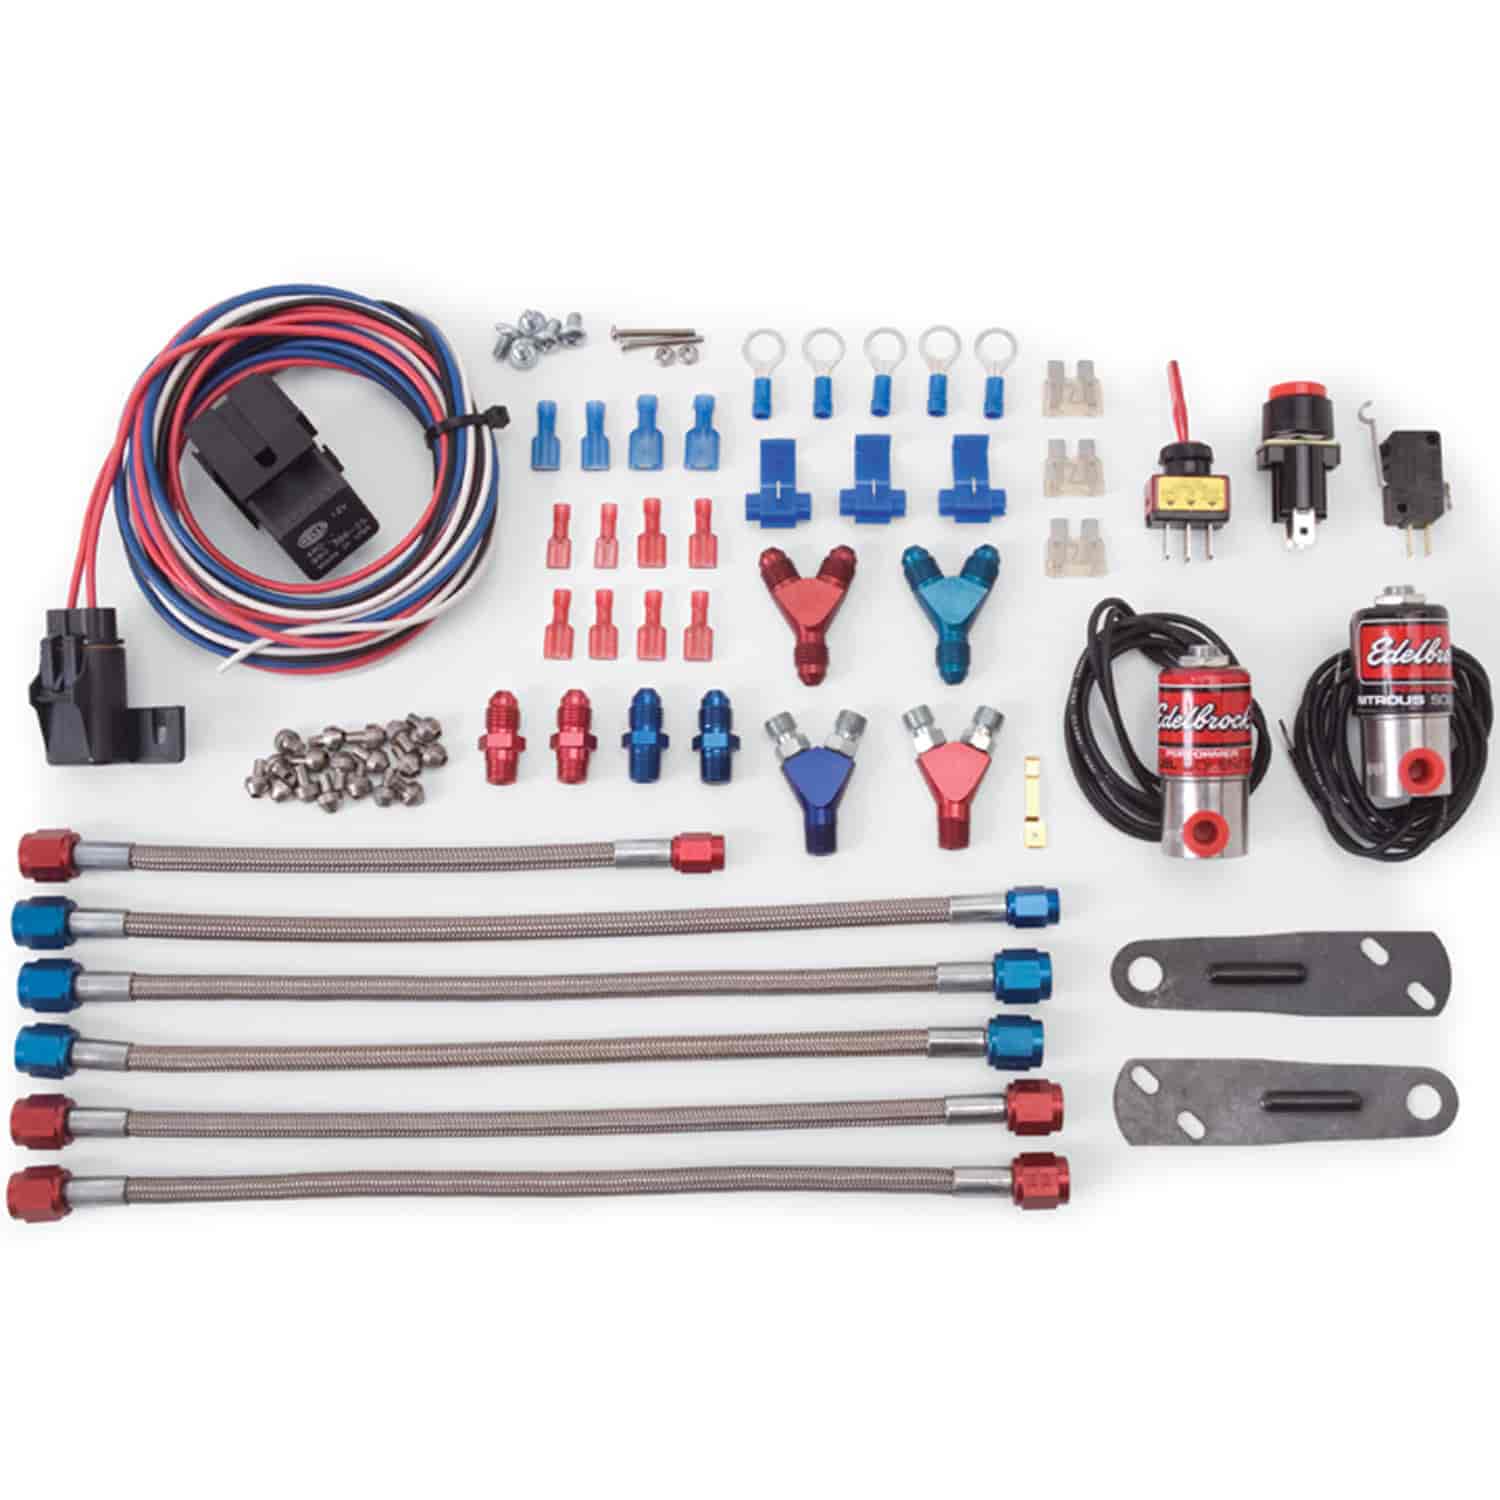 Performer RPM Single to Dual Stage Upgrade Kit